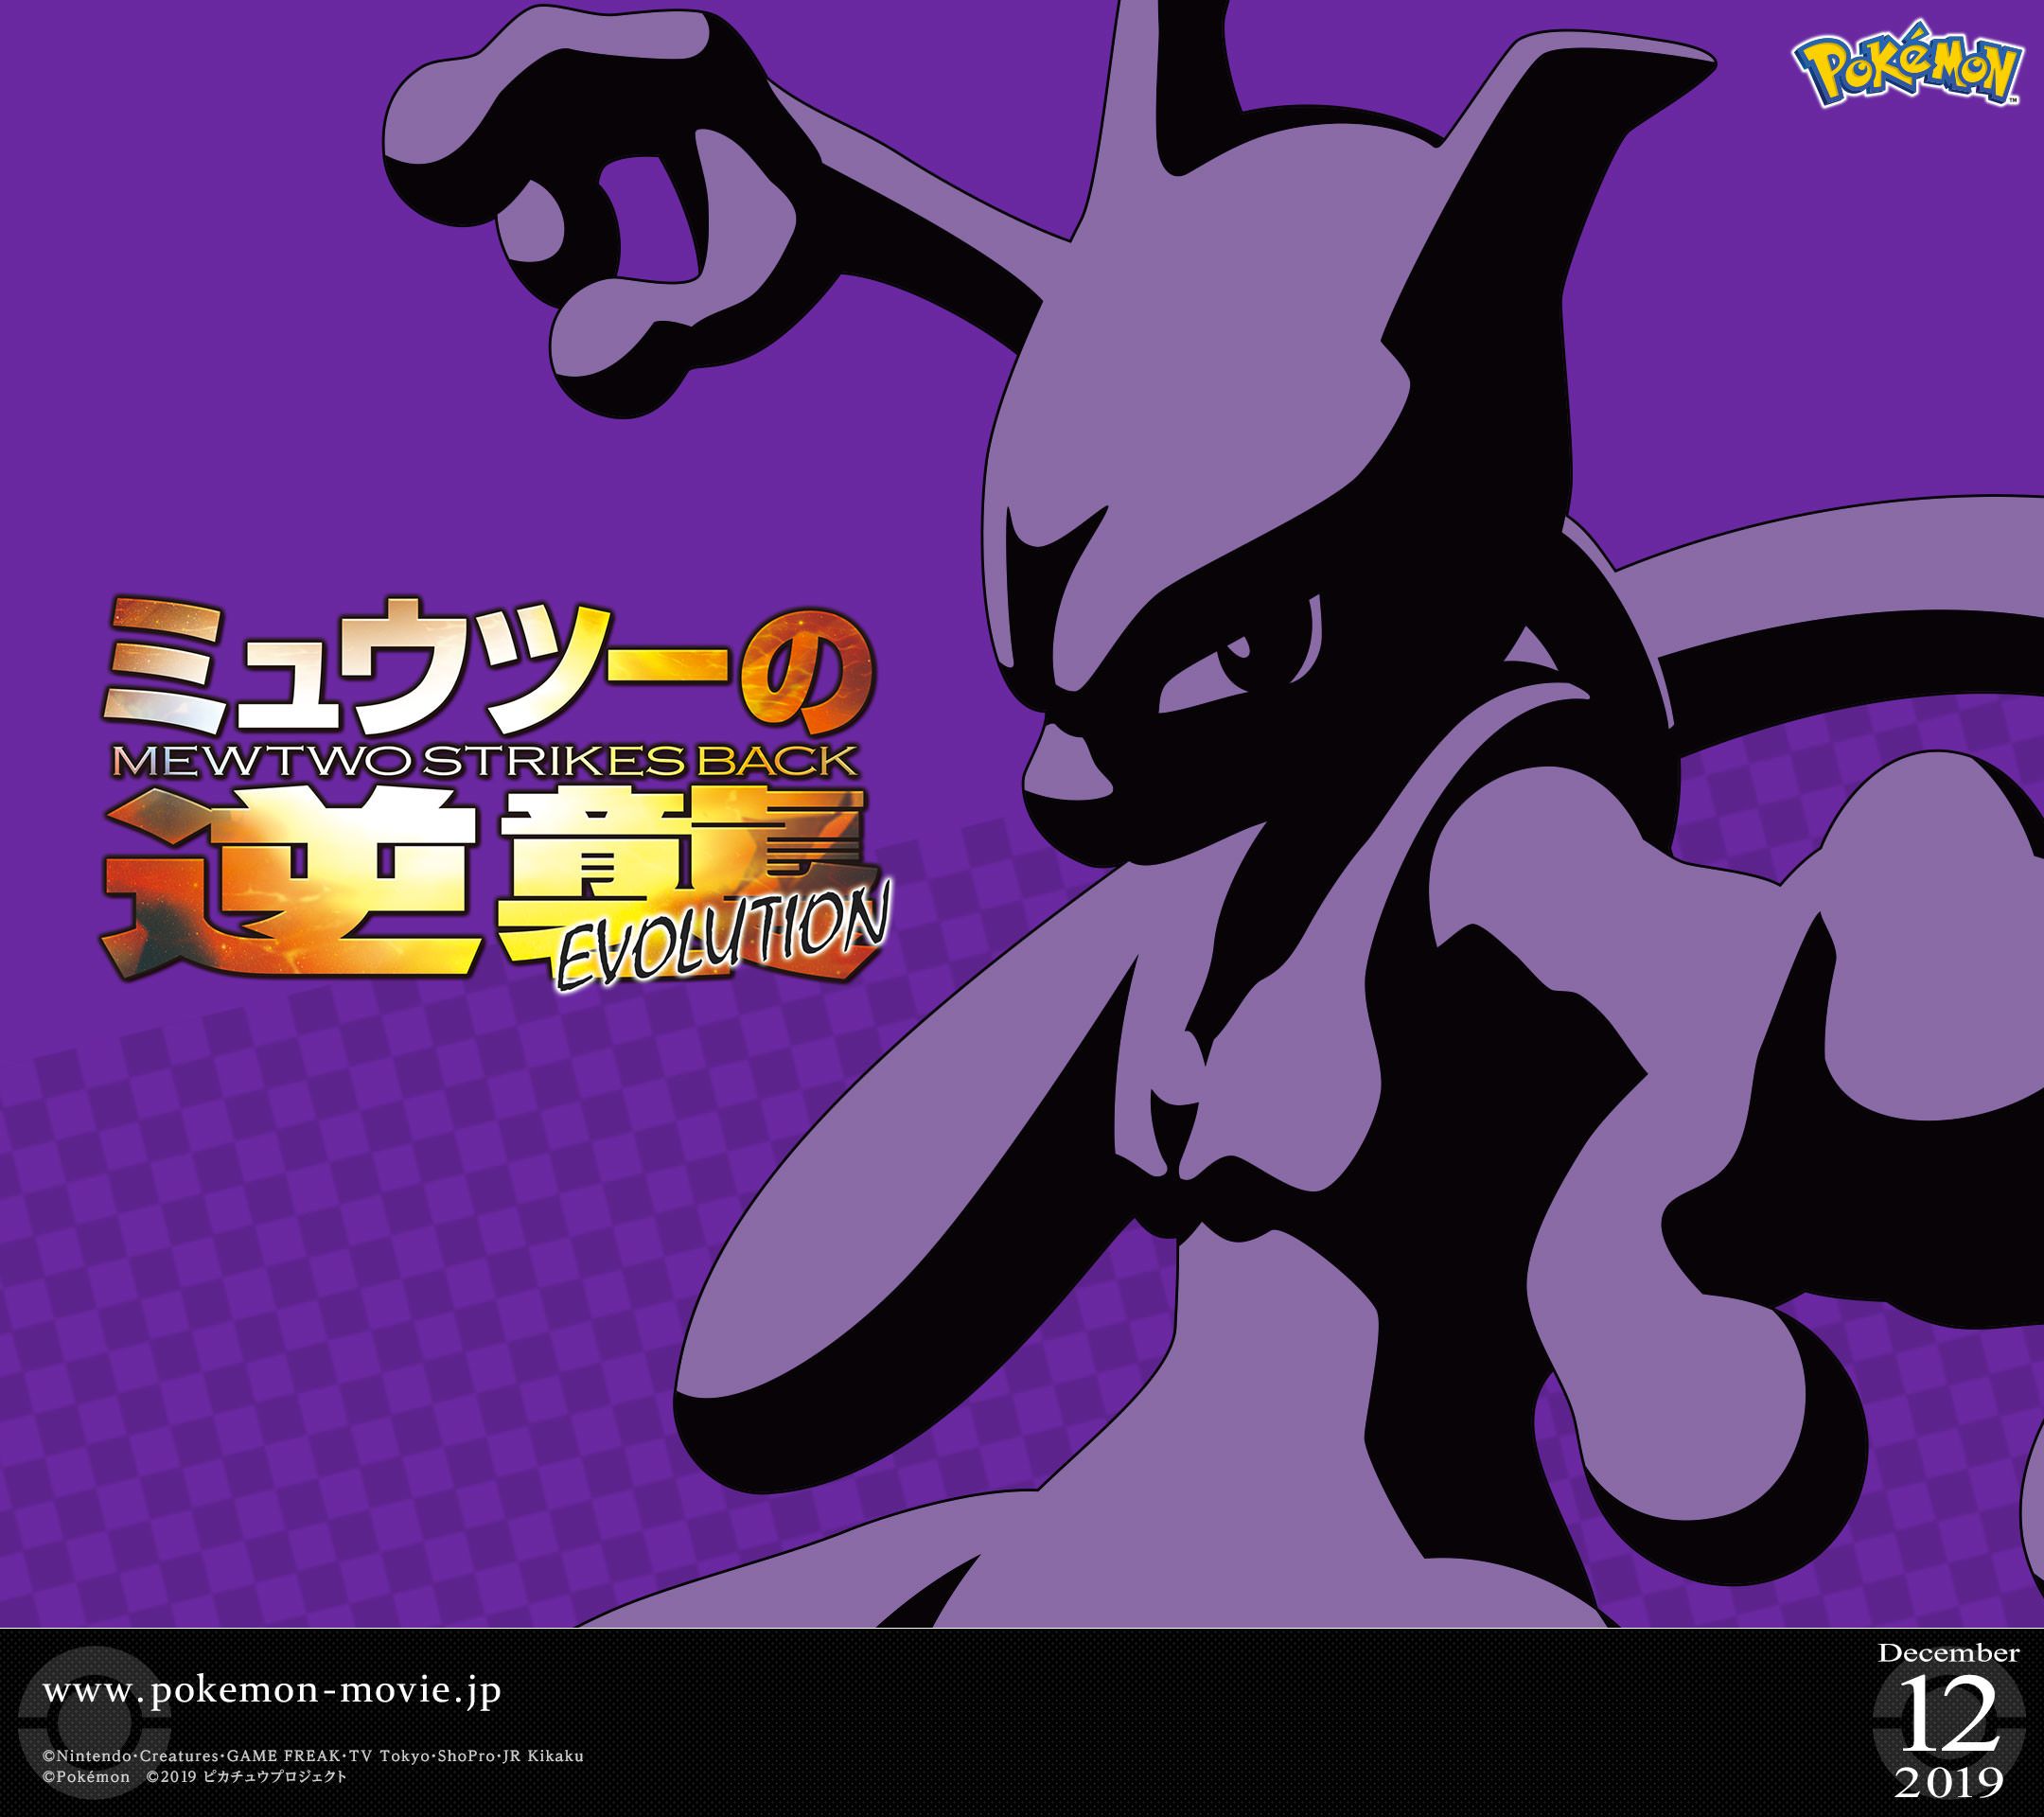 Download This Cool Mewtwo Strikes Back Evolution Wallpaper